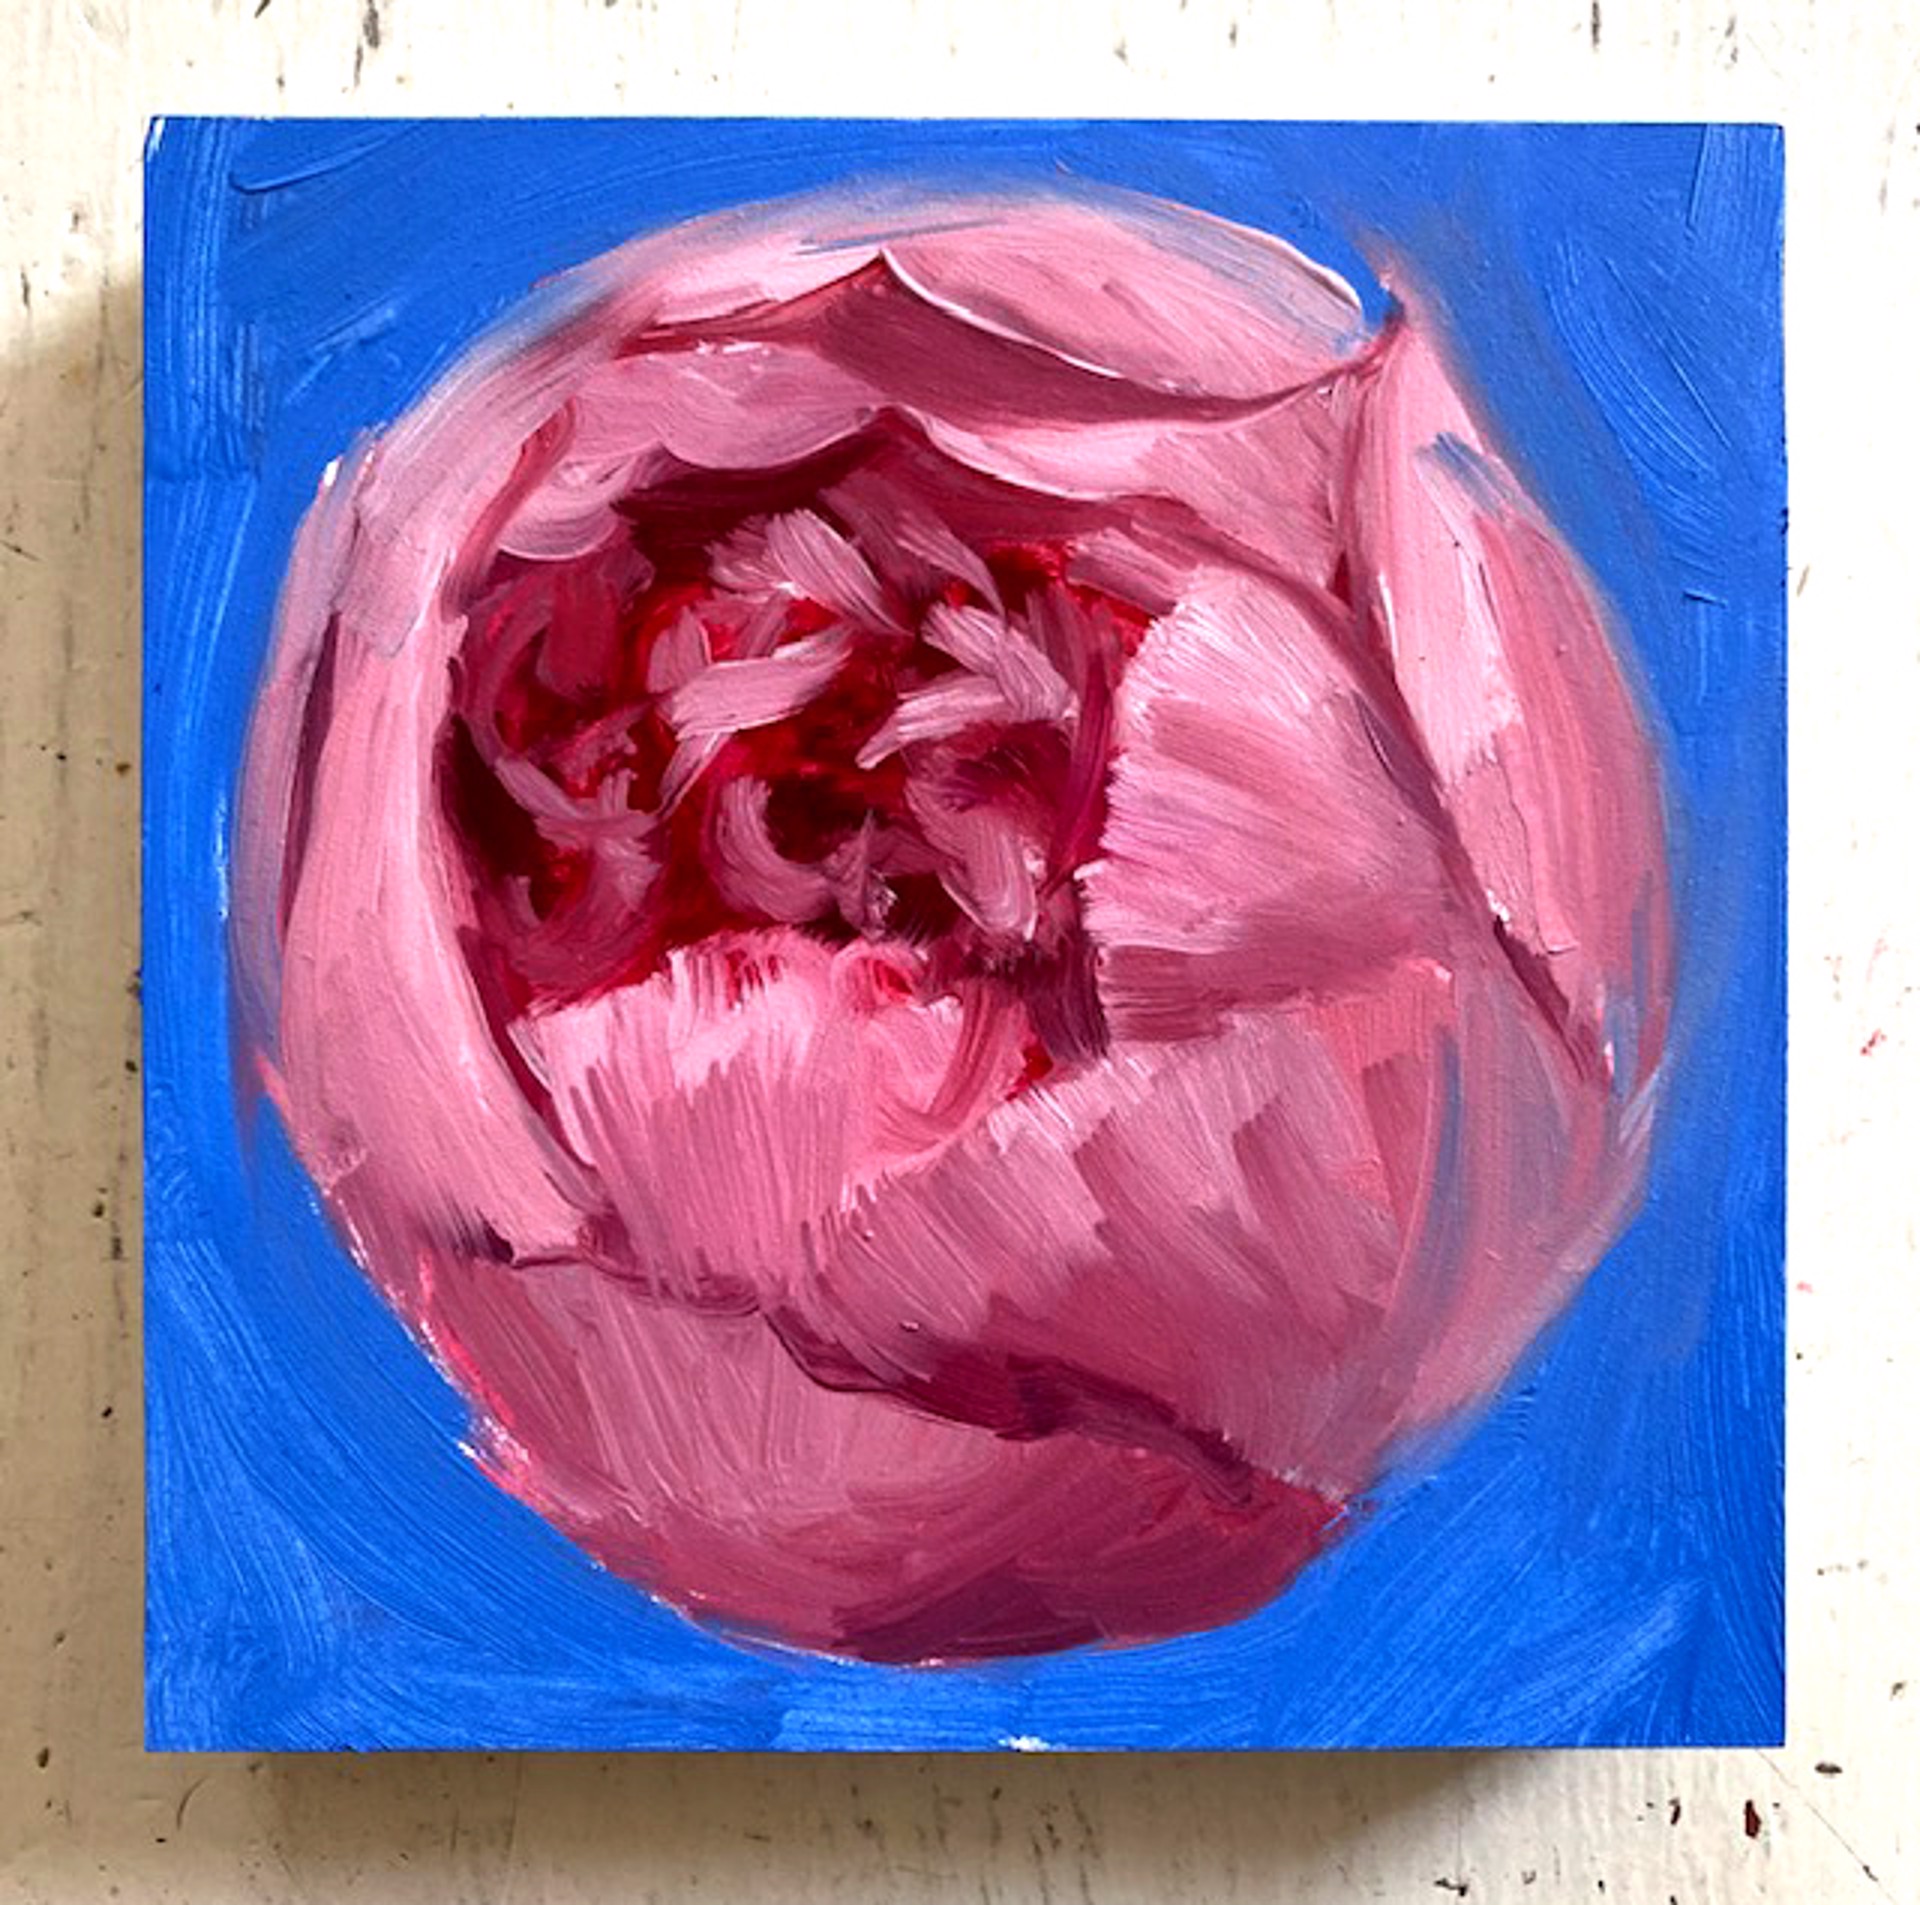 Peony Project #44 by Amy R. Peterson*